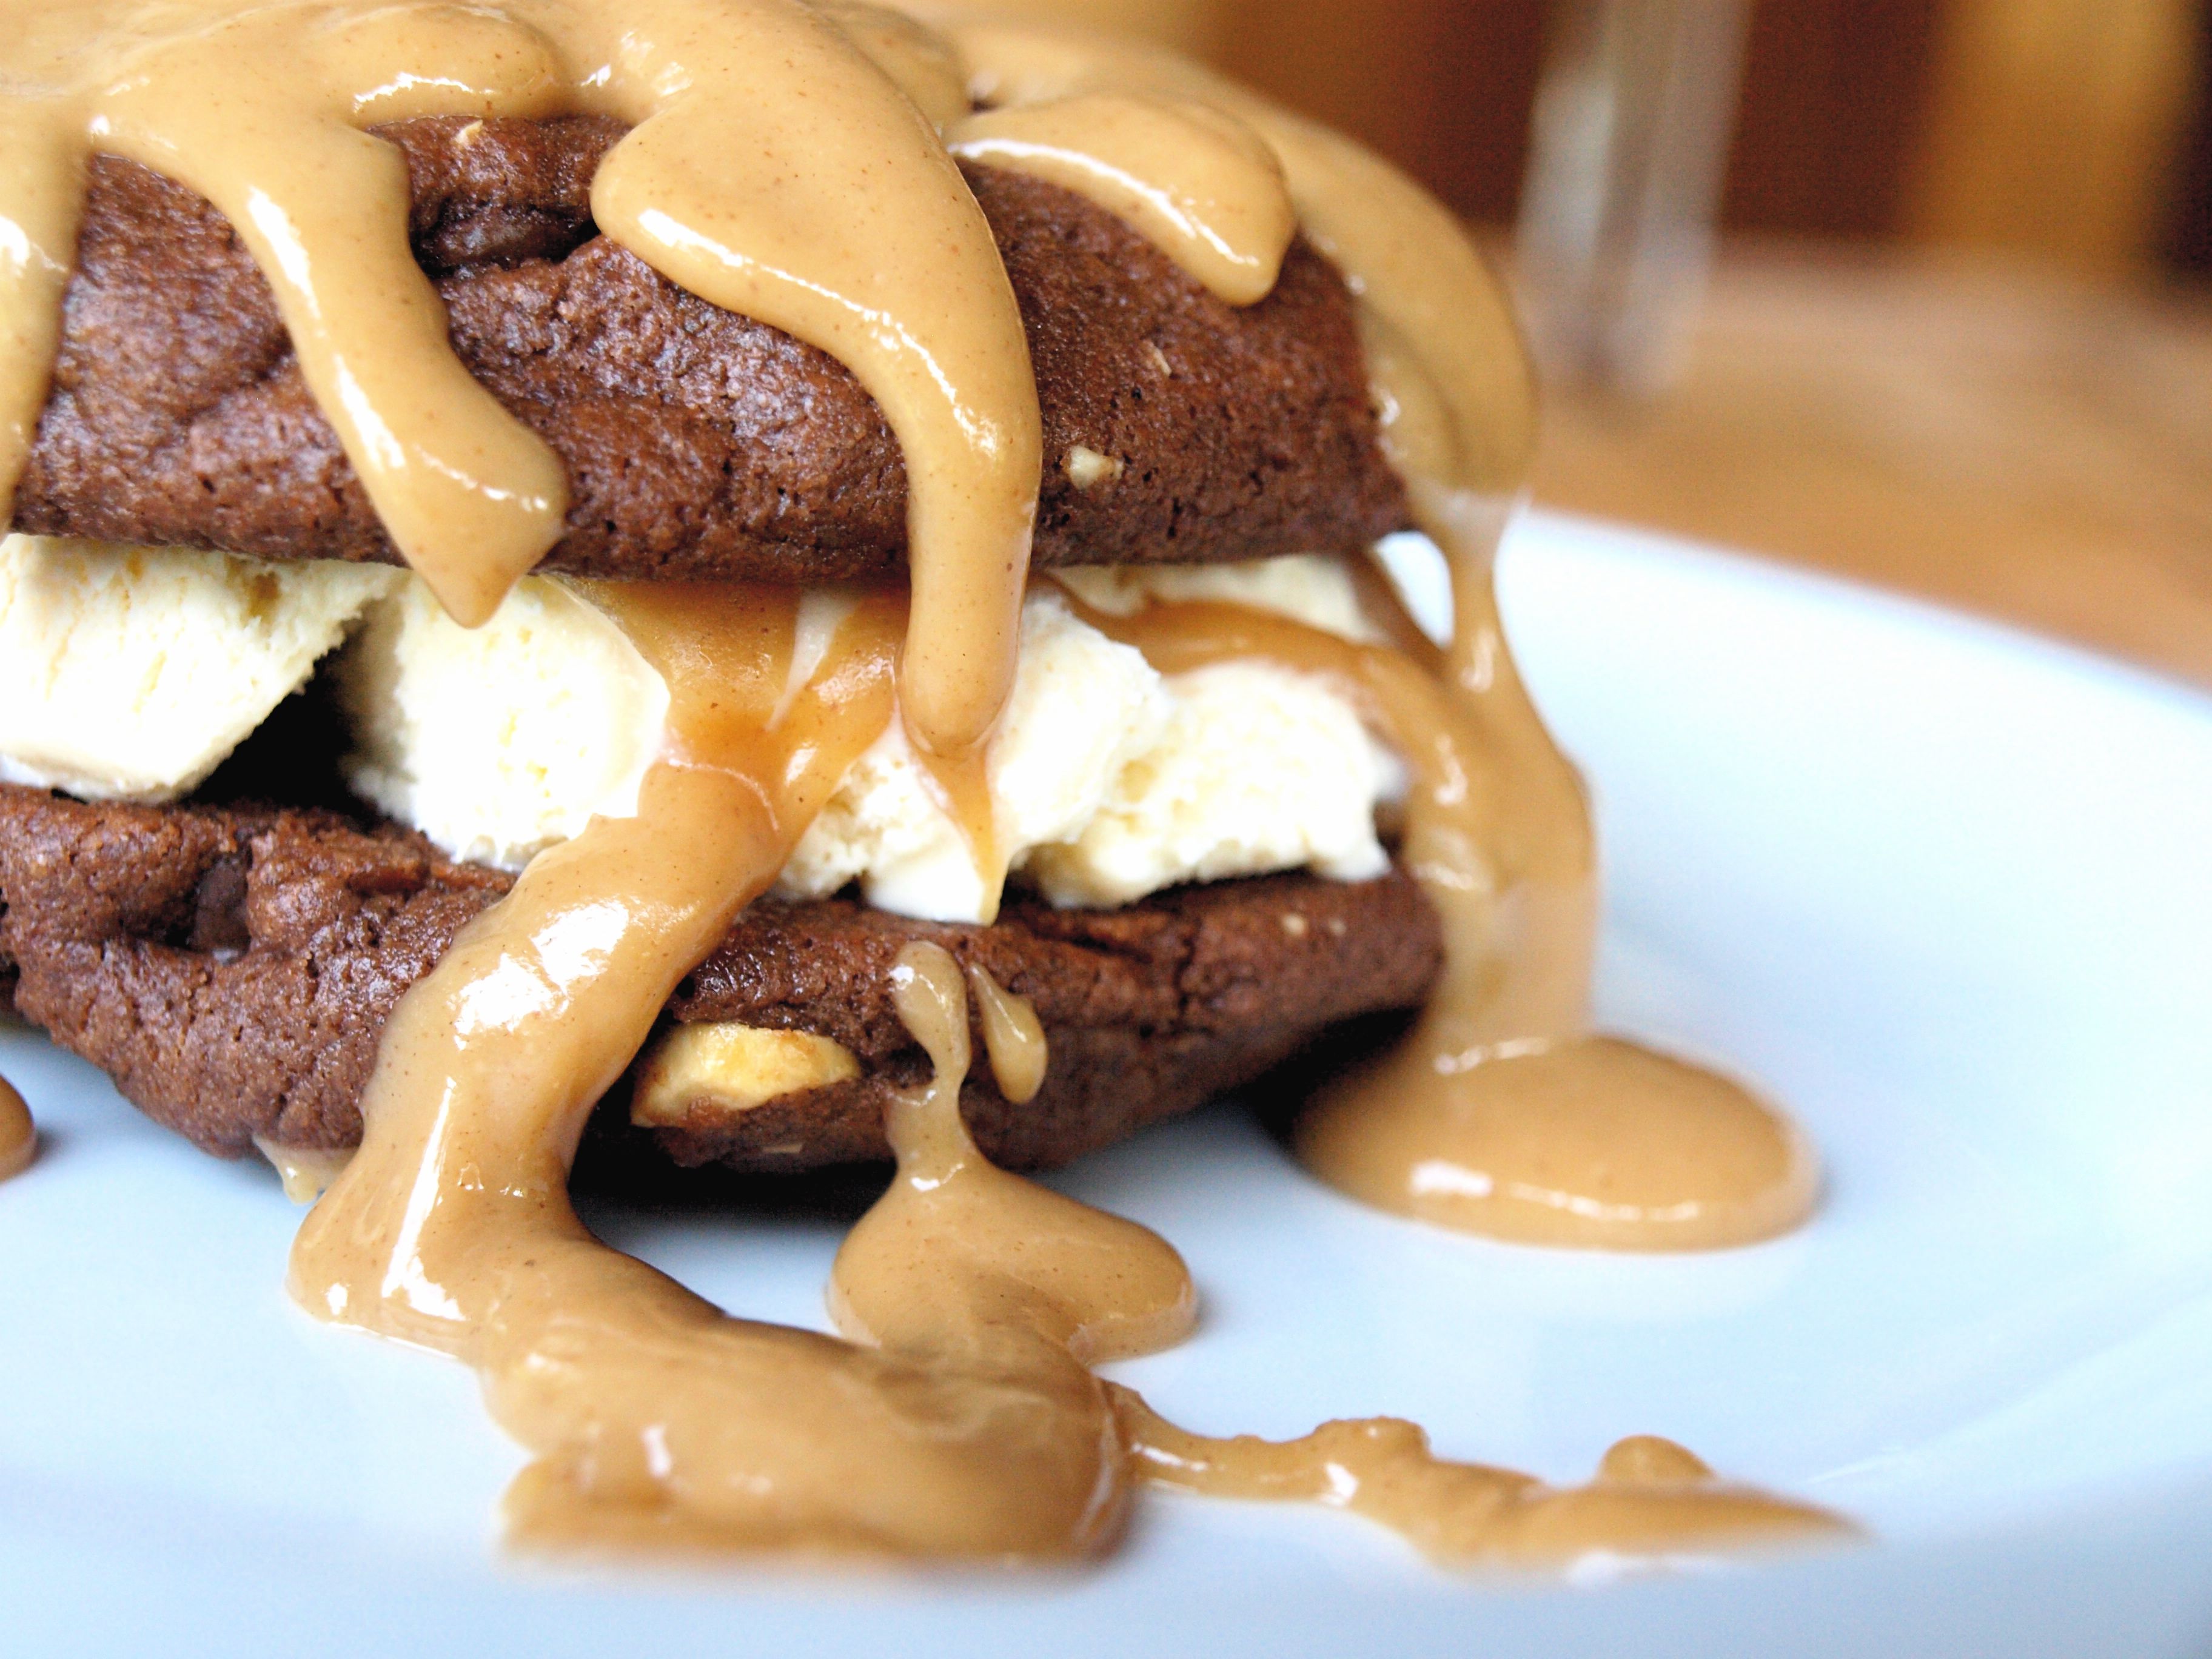 Peanut Butter Drenched Ice Cream Sandwiches